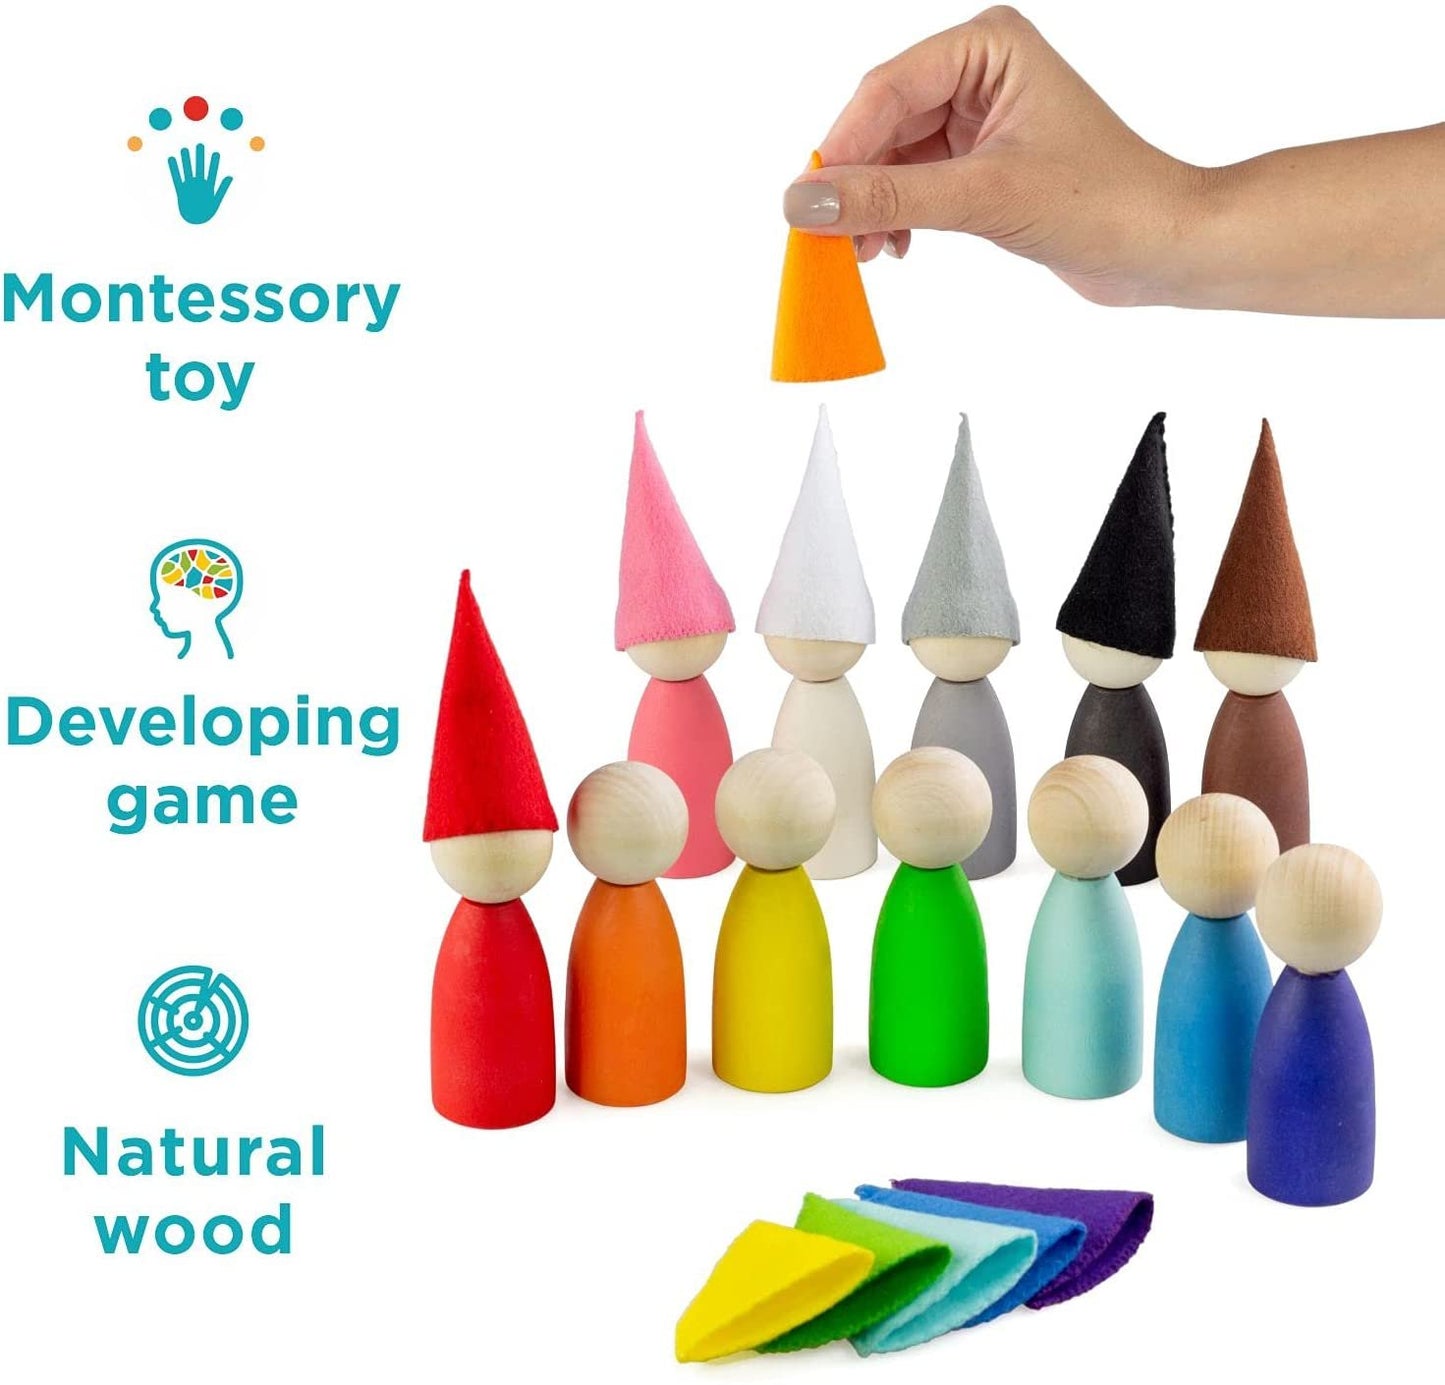 Ulanik Large Peg Dolls with Hats Toddler Montessori Toys for 3+ Wooden Waldorf Dolls for Learning Color Sorting and Counting